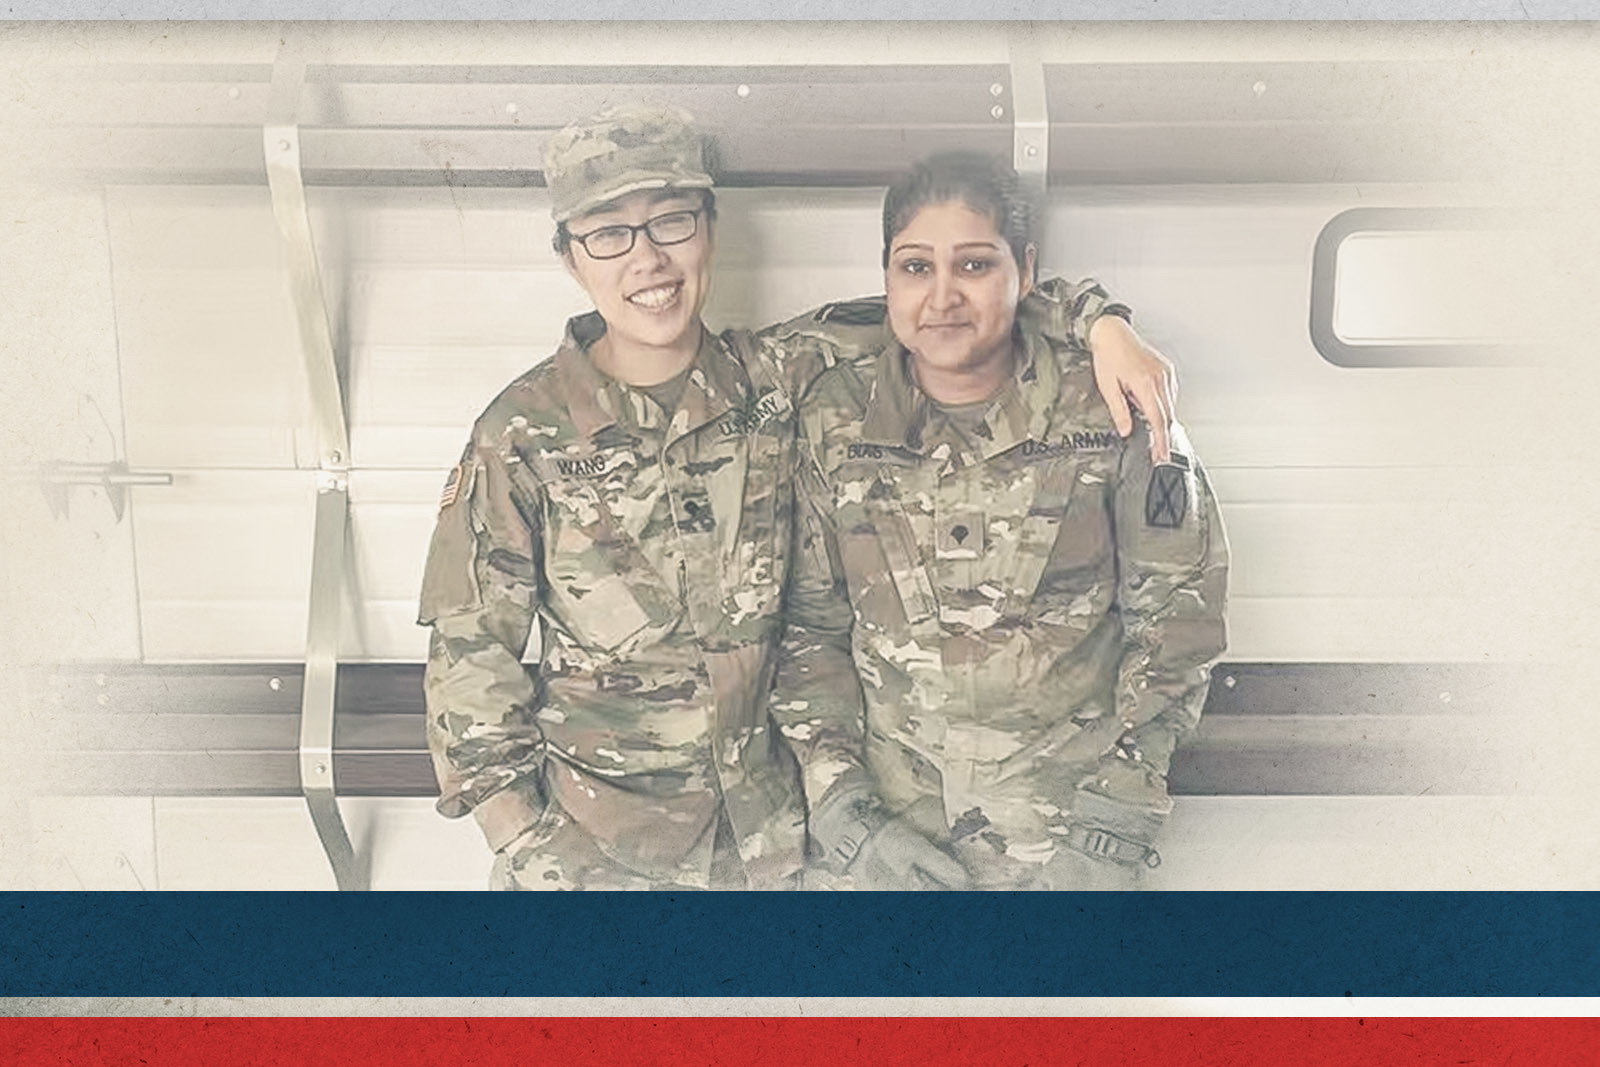 Financial Management Technician SPC Rishika Blevins, right, with then SPC (now SSG) Mengqi Wang, left, at Fort Drum in New York.